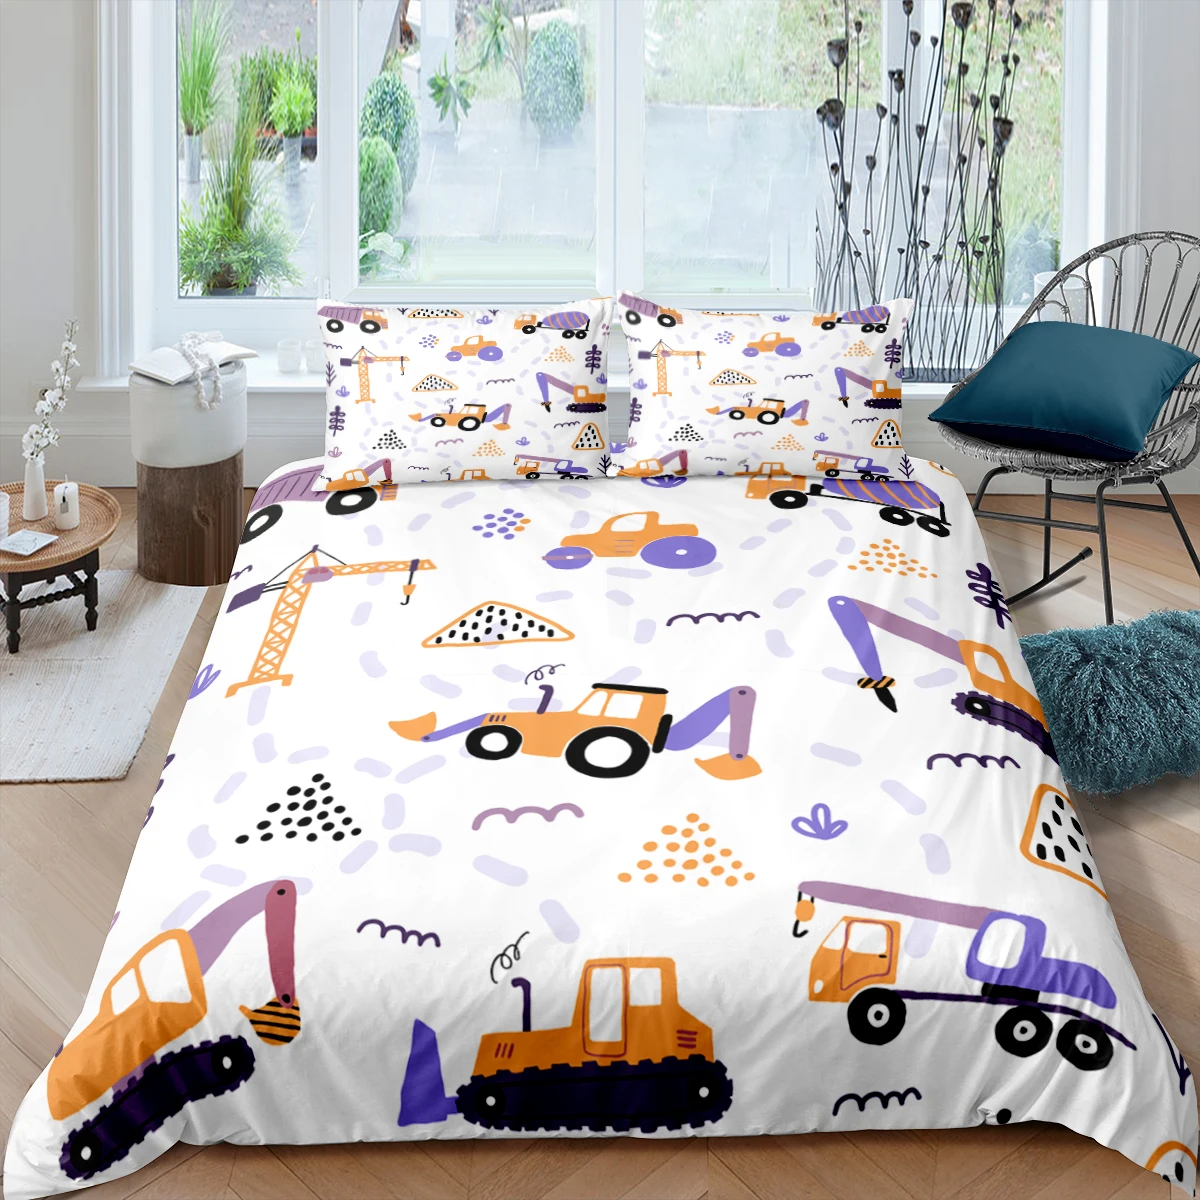 

Home Living Luxury 3D Tractor Bedding Set Excavator Duvet Cover Pillowcase Queen and King EU/US/AU/UK Size Comforter Bedding